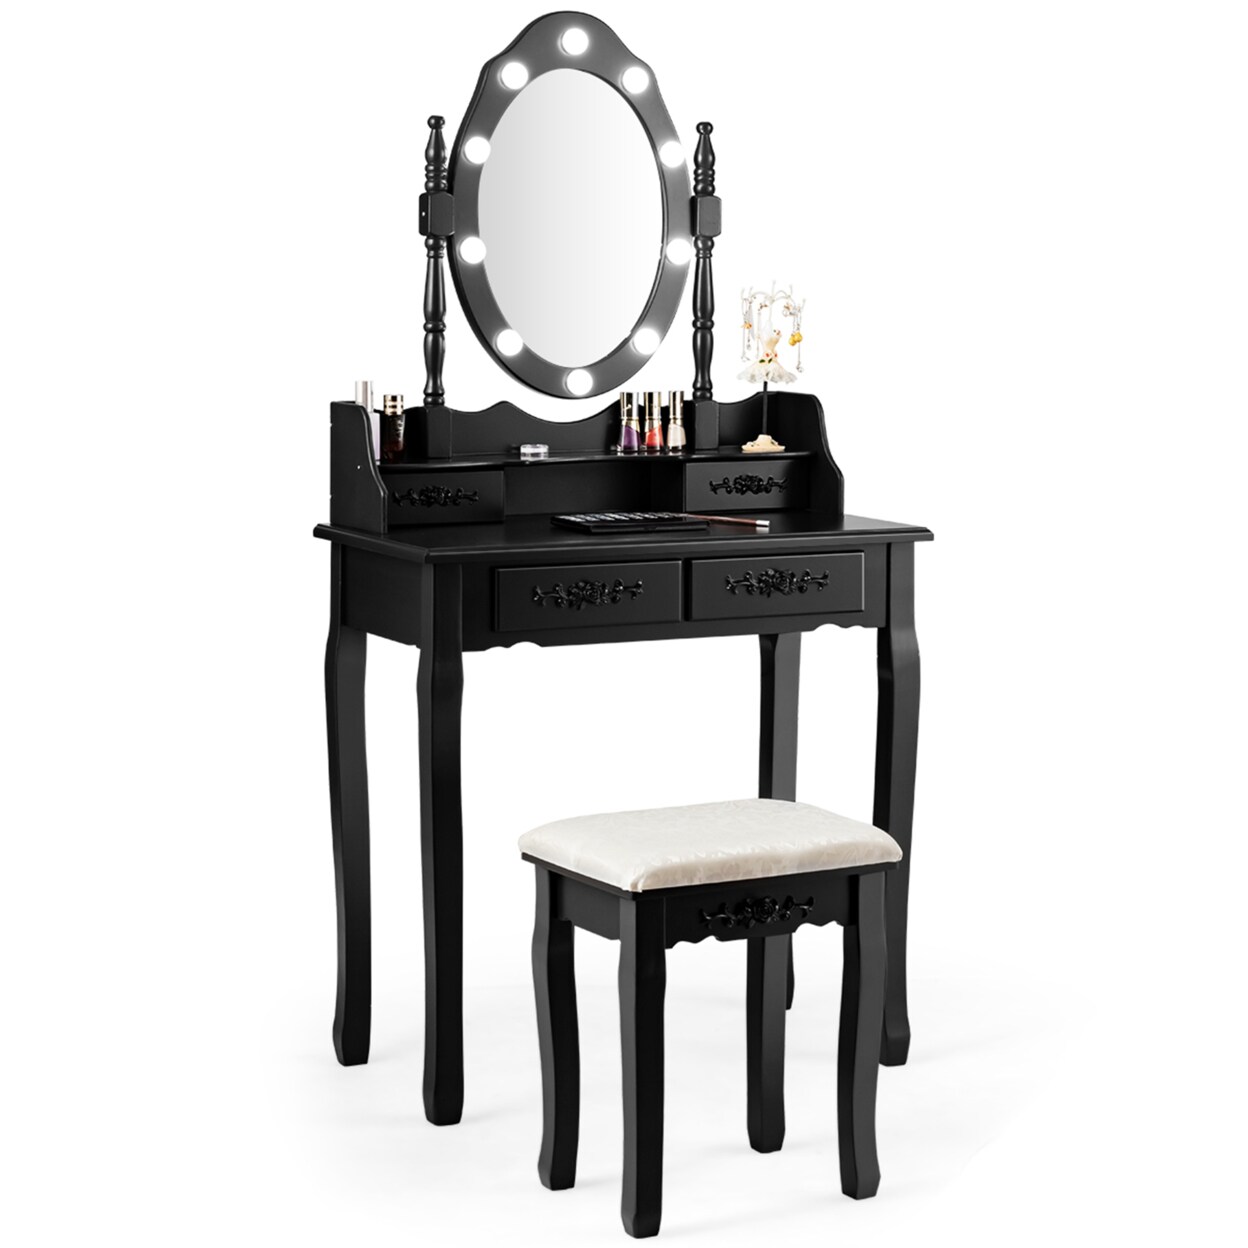 Gymax Makeup Vanity Dressing Table Set w/10 Dimmable Bulbs Cushioned Stool